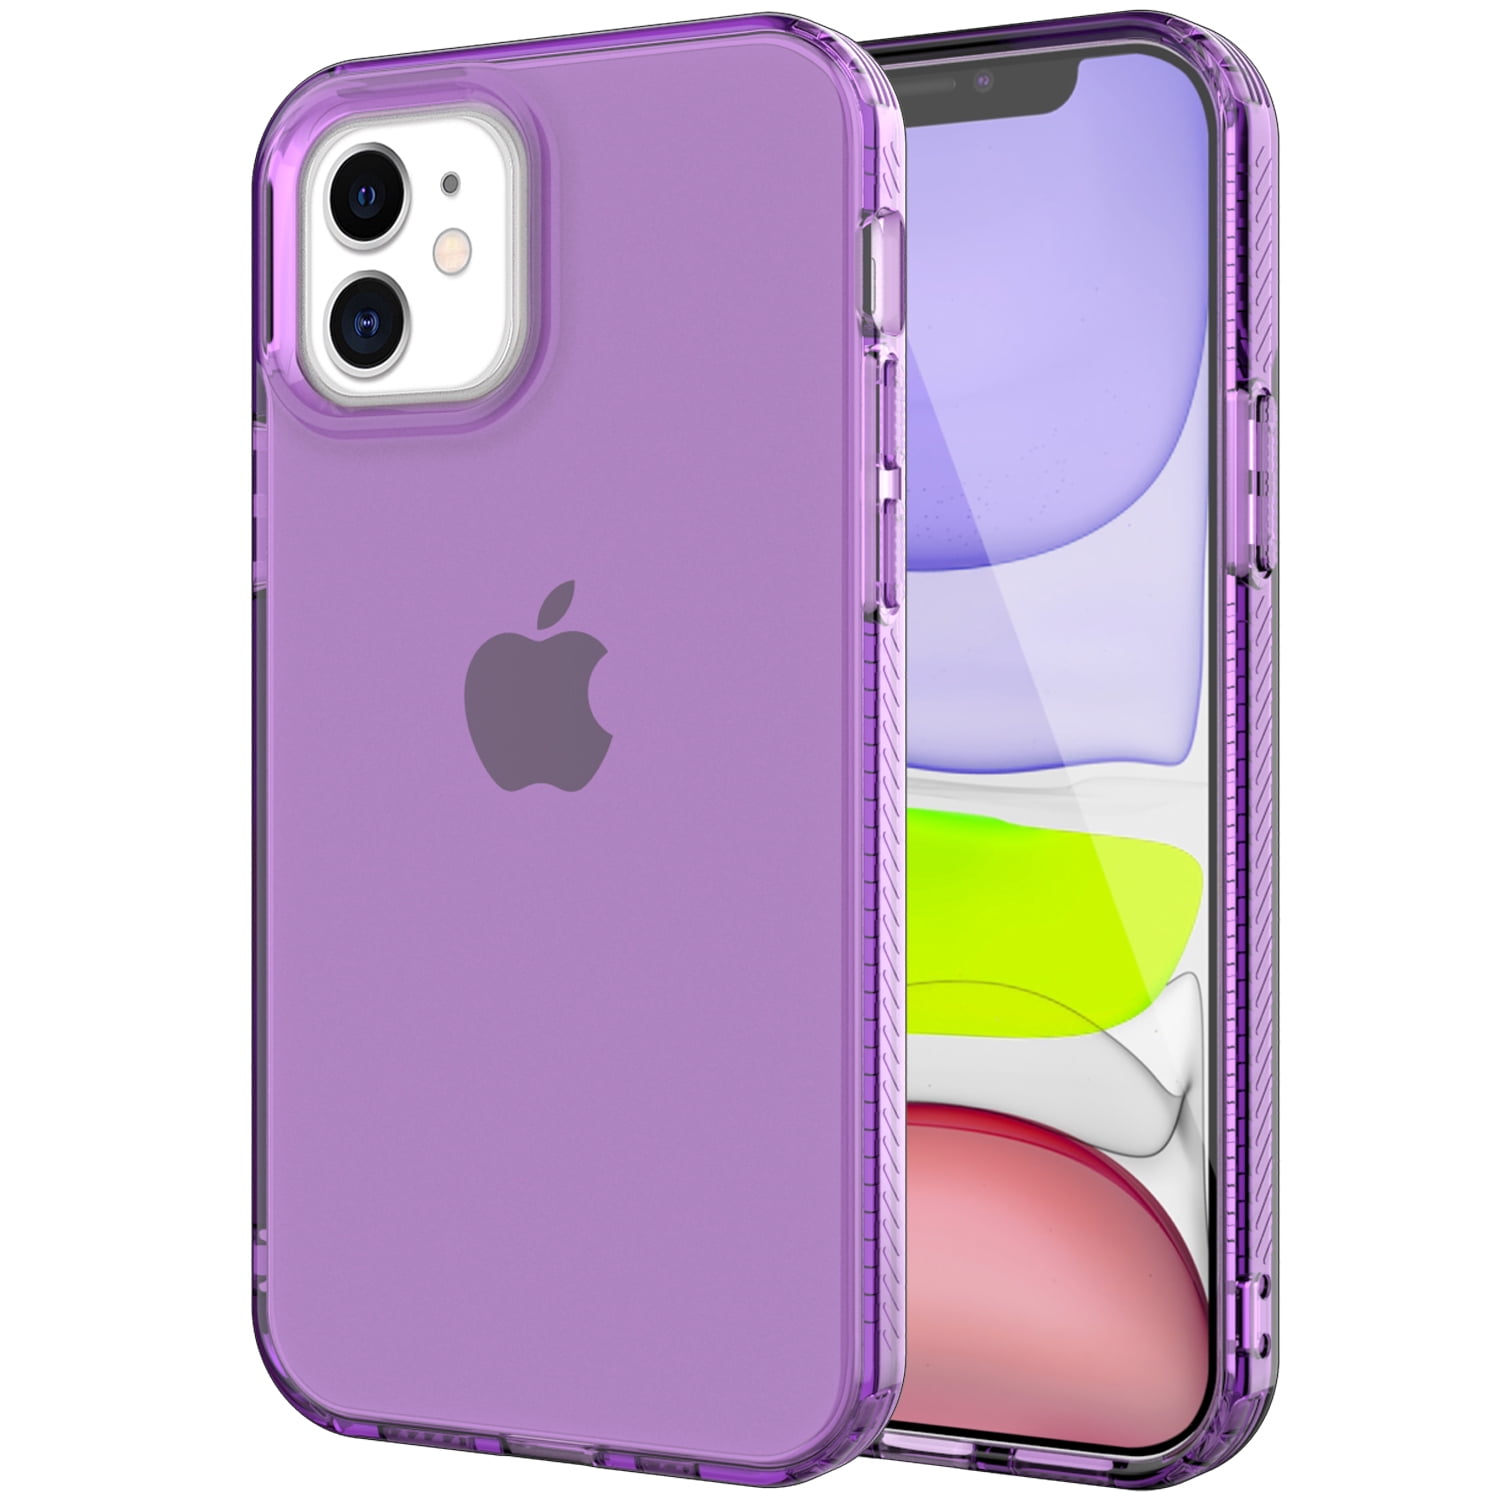 iPhone 11 Case 6.1-inch Phone, Allytech Clear TPU Back Cover Shockproof  Anti-scratch Drop Protection Case Cover for Apple iPhone 11 6.1-inch, Clear  